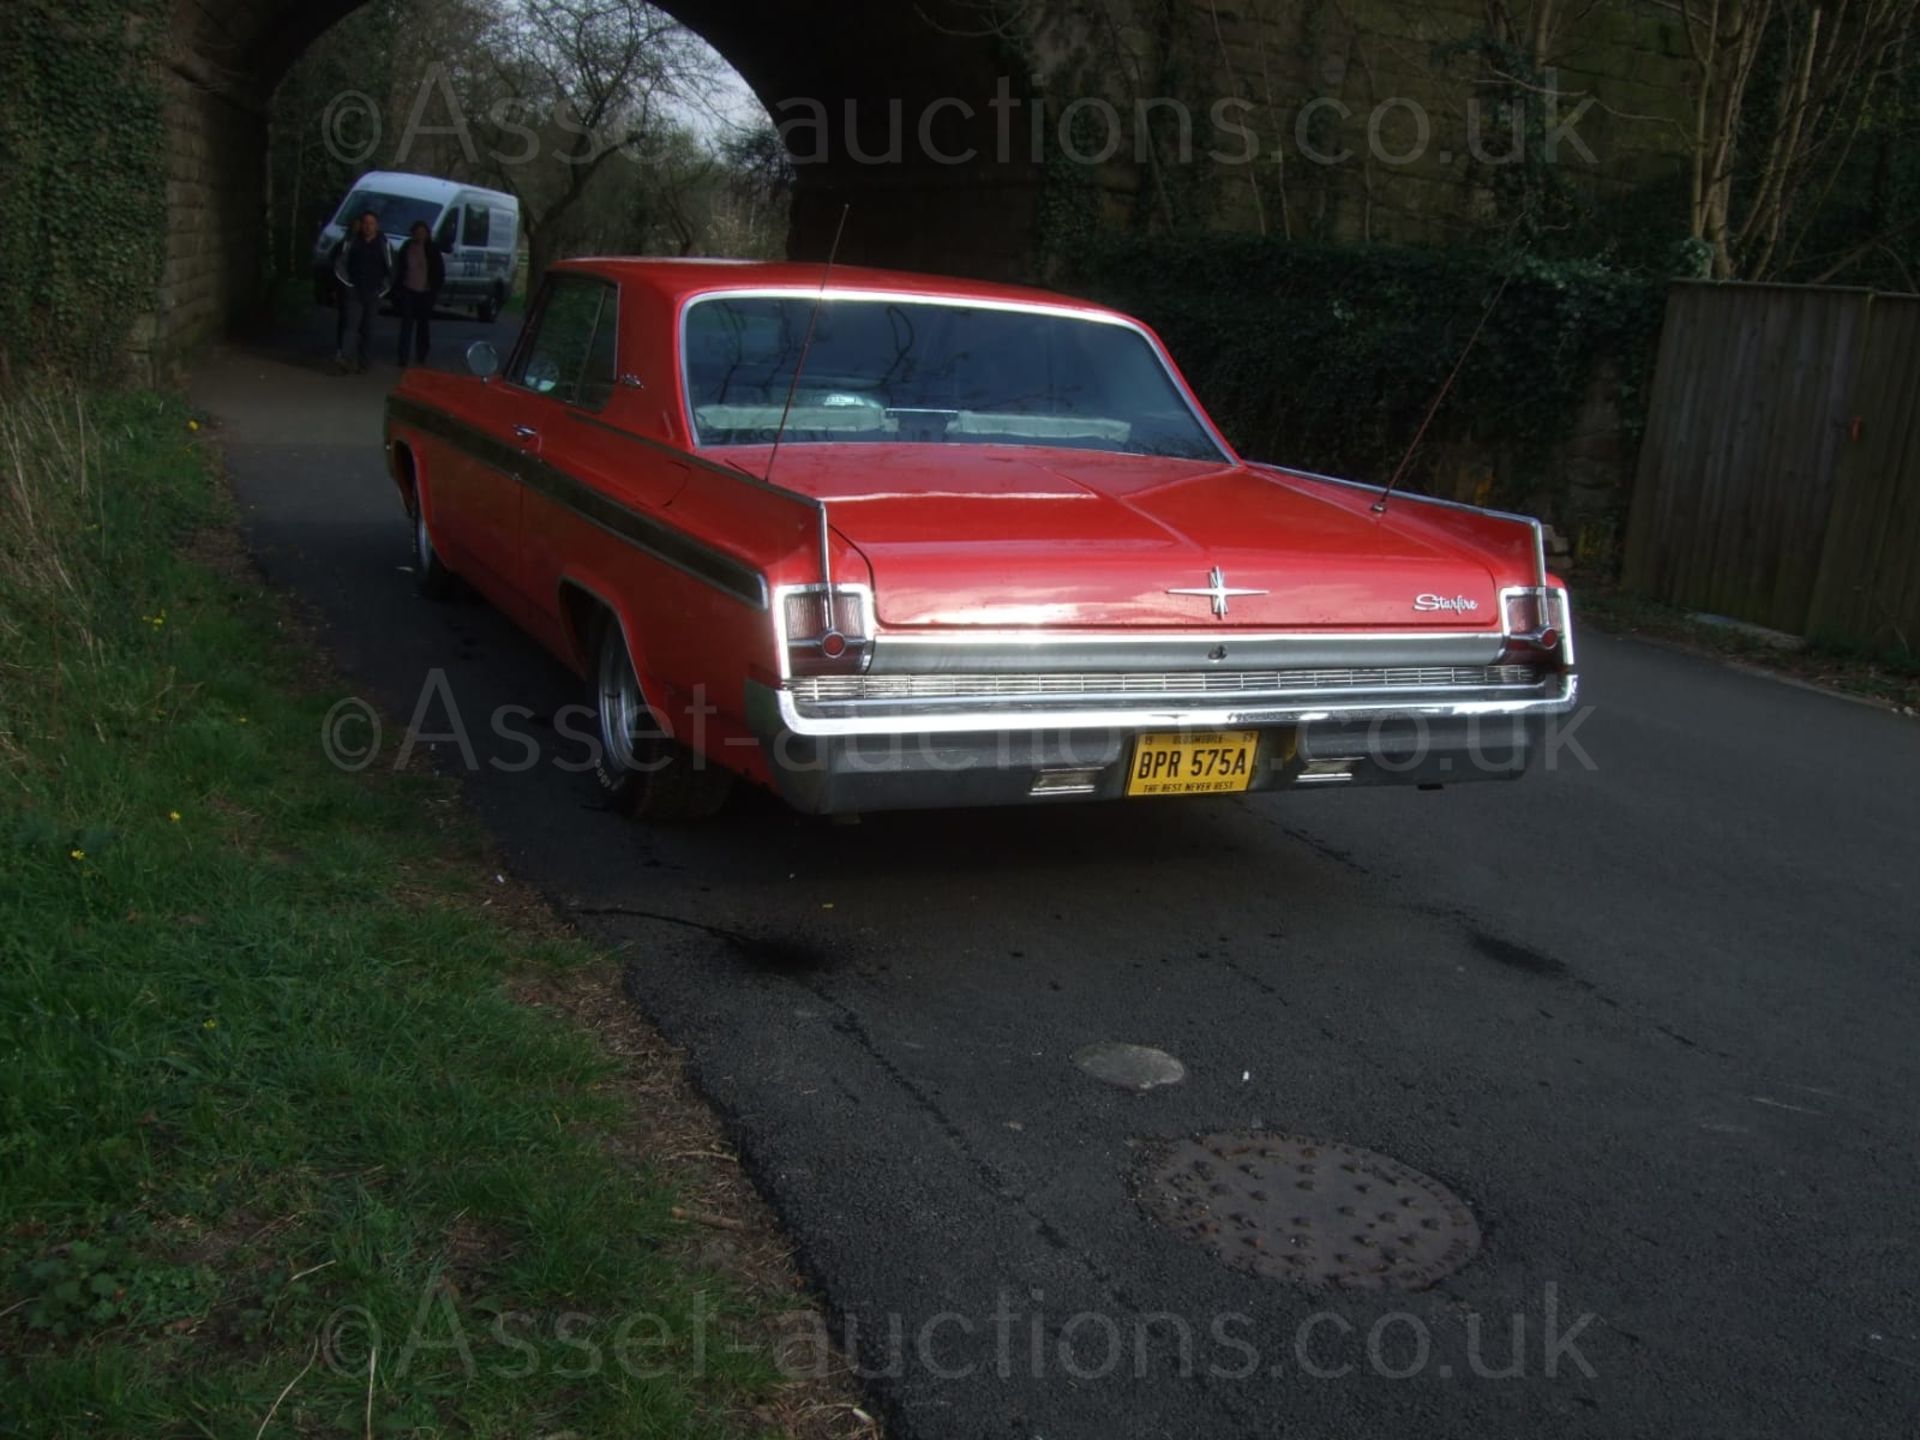 1963 OLDSMOBILE, STARFIRE COUPE, RARE CAR! SHOWING 71,026 MILES, MOT AND TAX EXEMPT *NO VAT* - Image 10 of 22